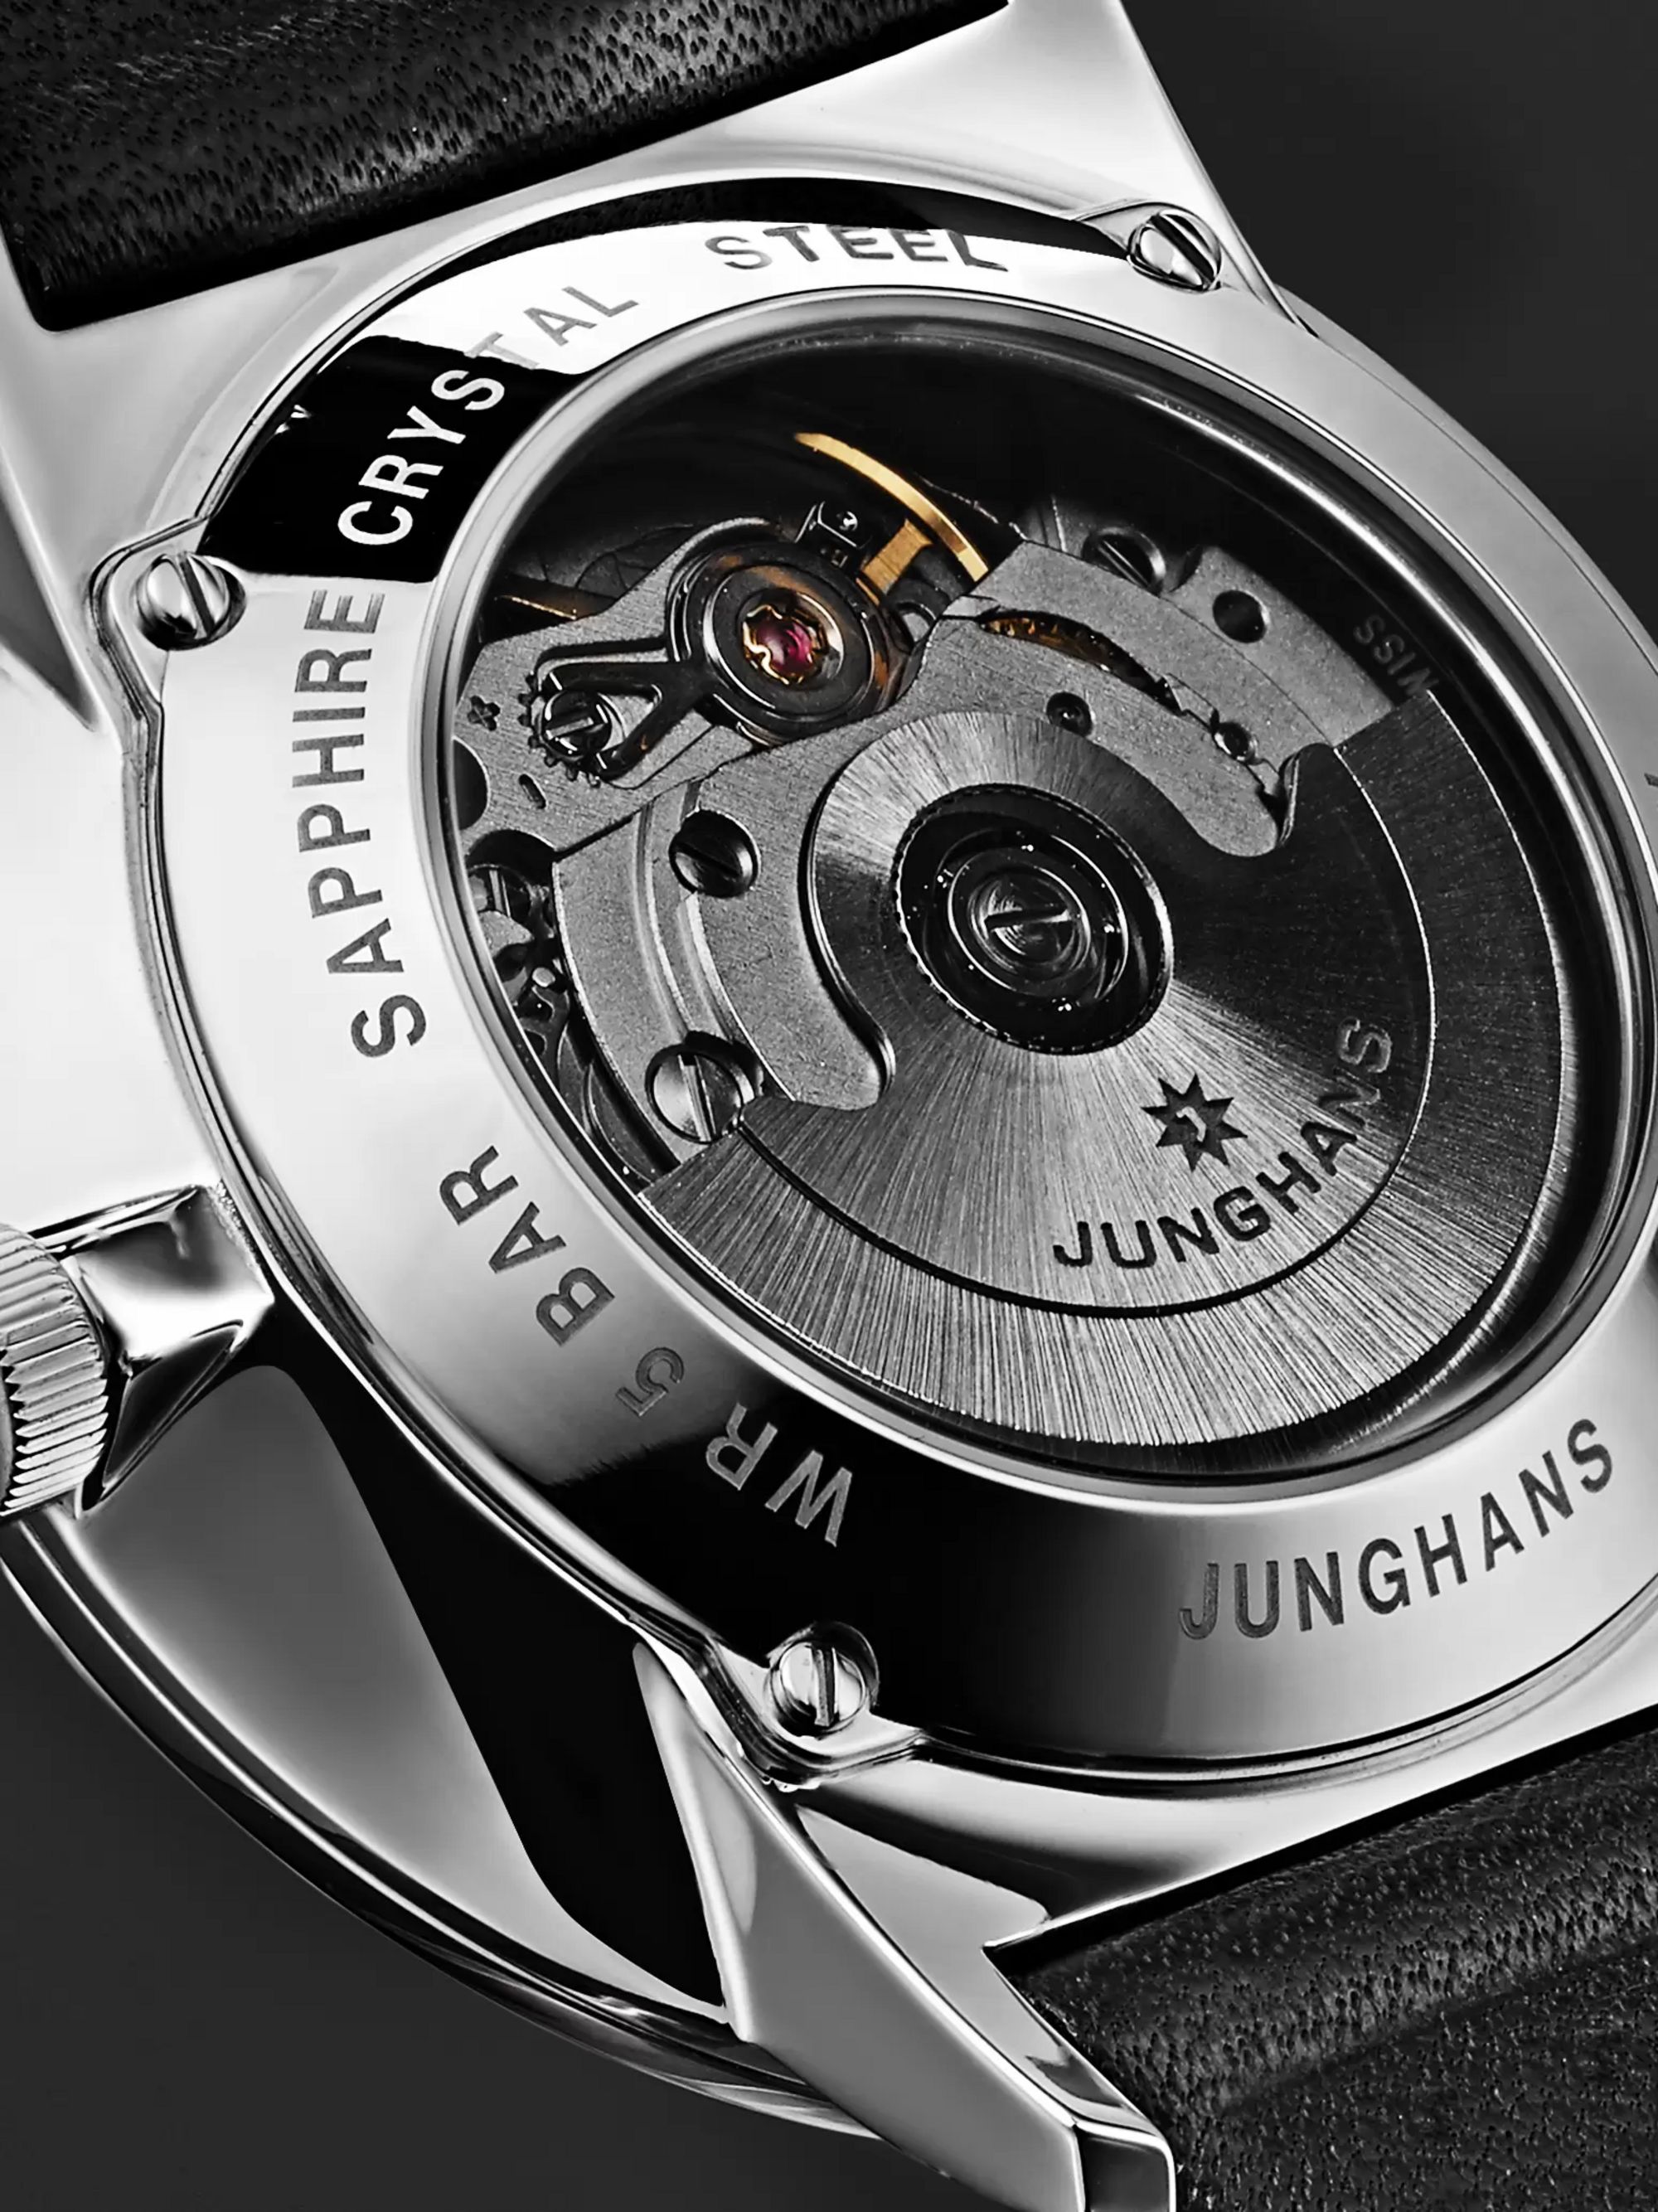 JUNGHANS Form A 40mm Automatic Stainless Steel and Leather Watch, Ref. No. 027/4730.00